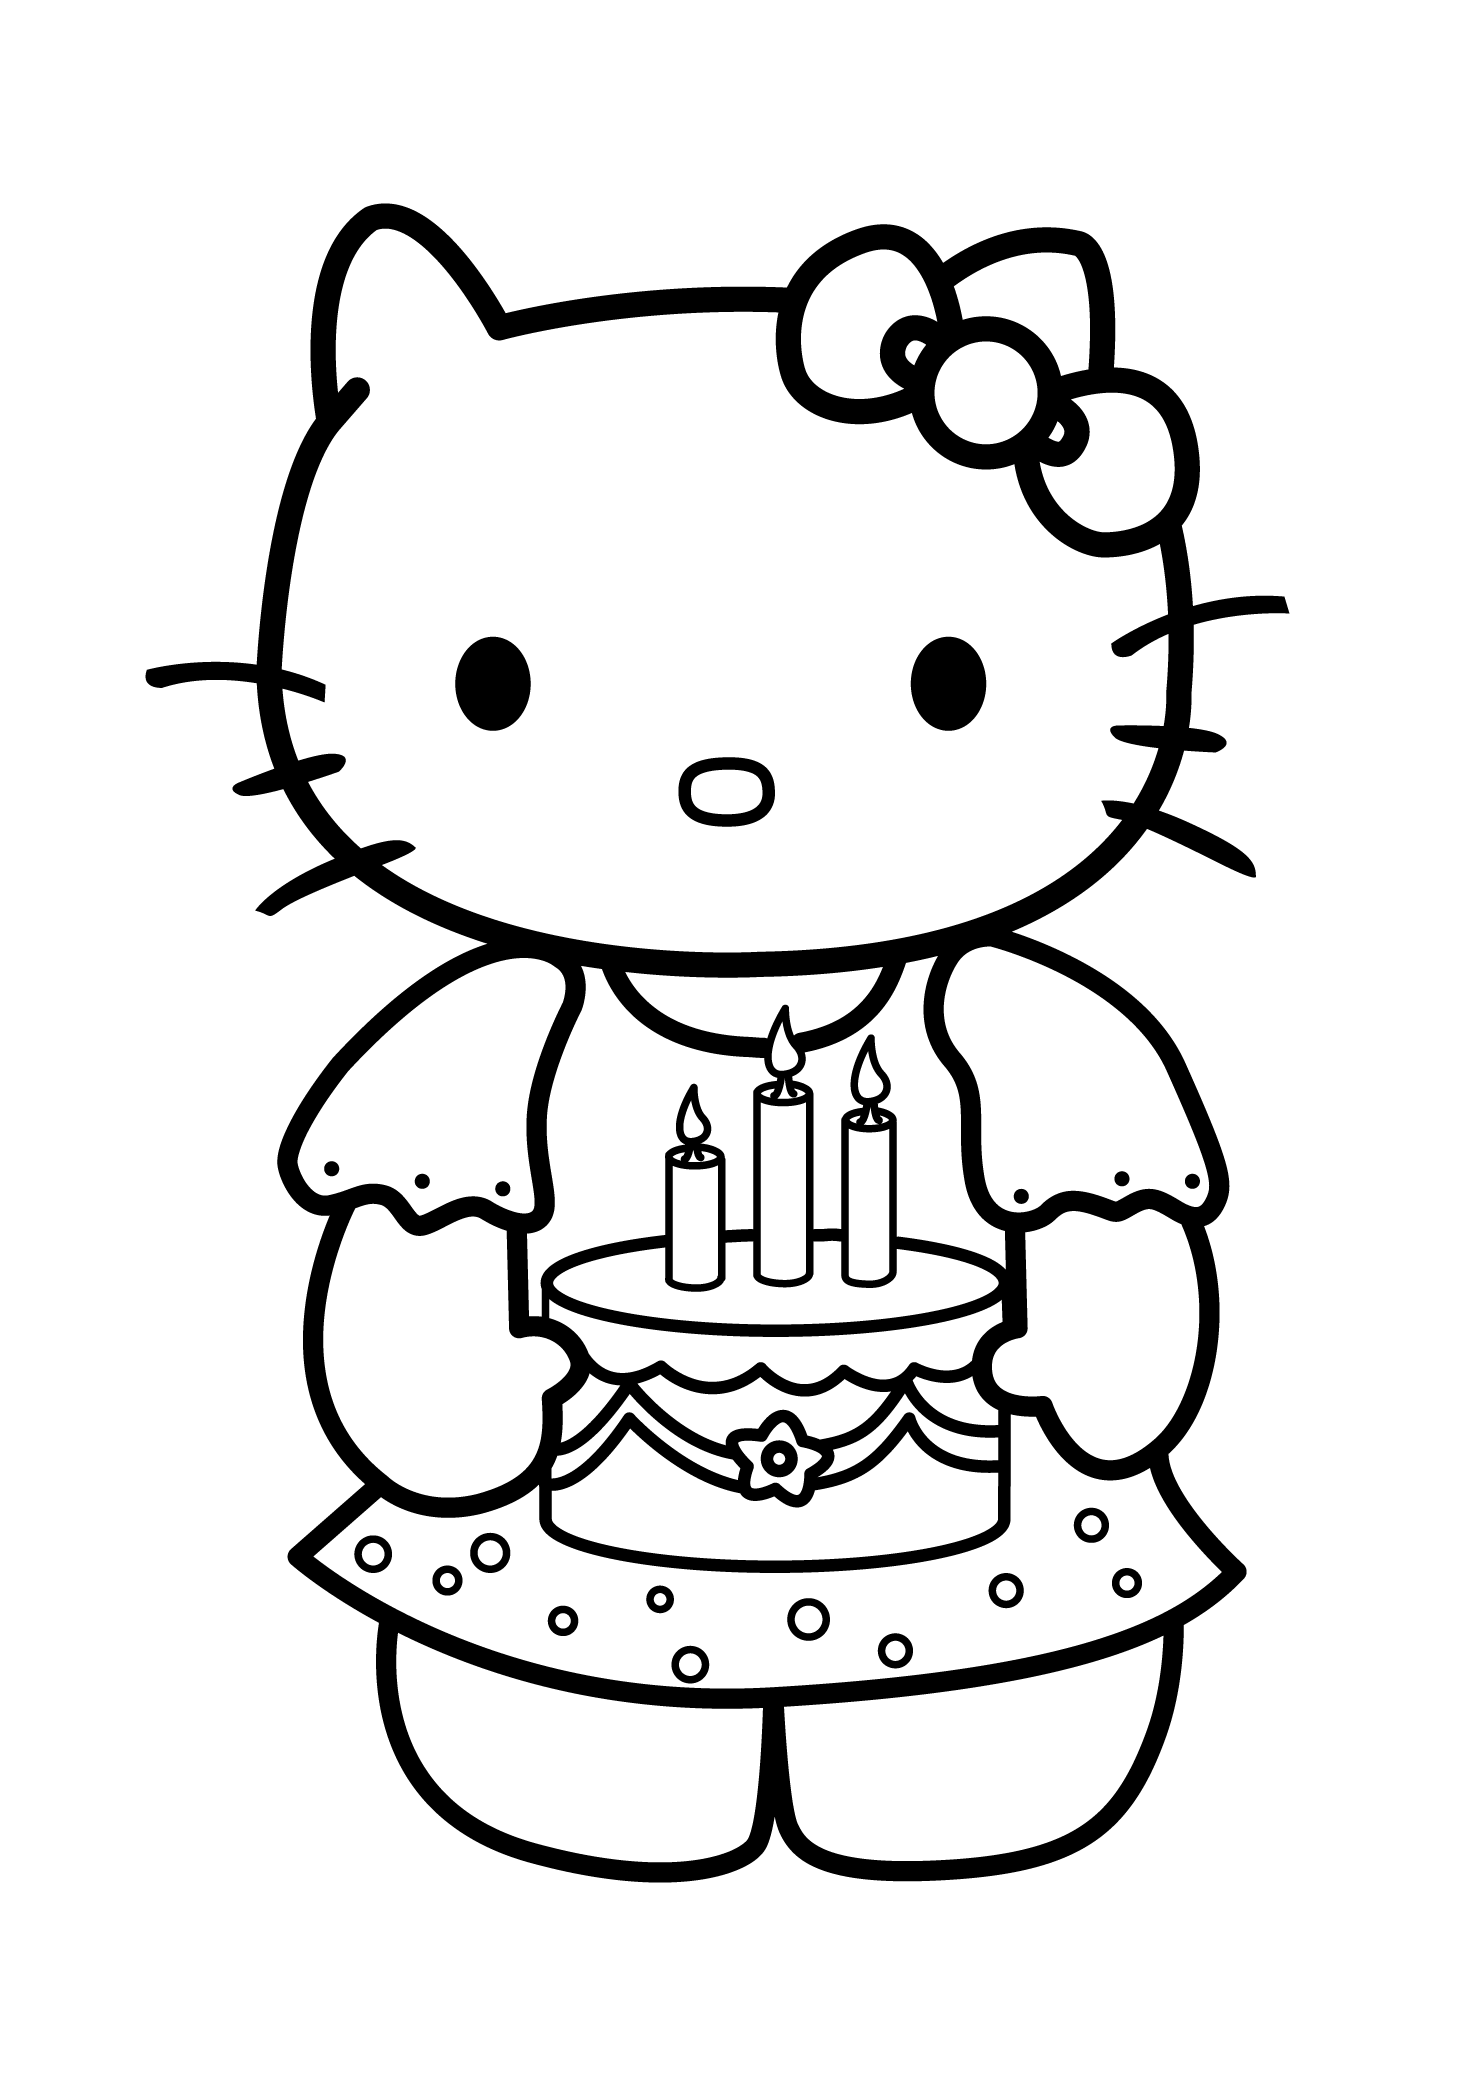 hello-kitty-birthday-coloring-pages-best-coloring-pages-for-kids